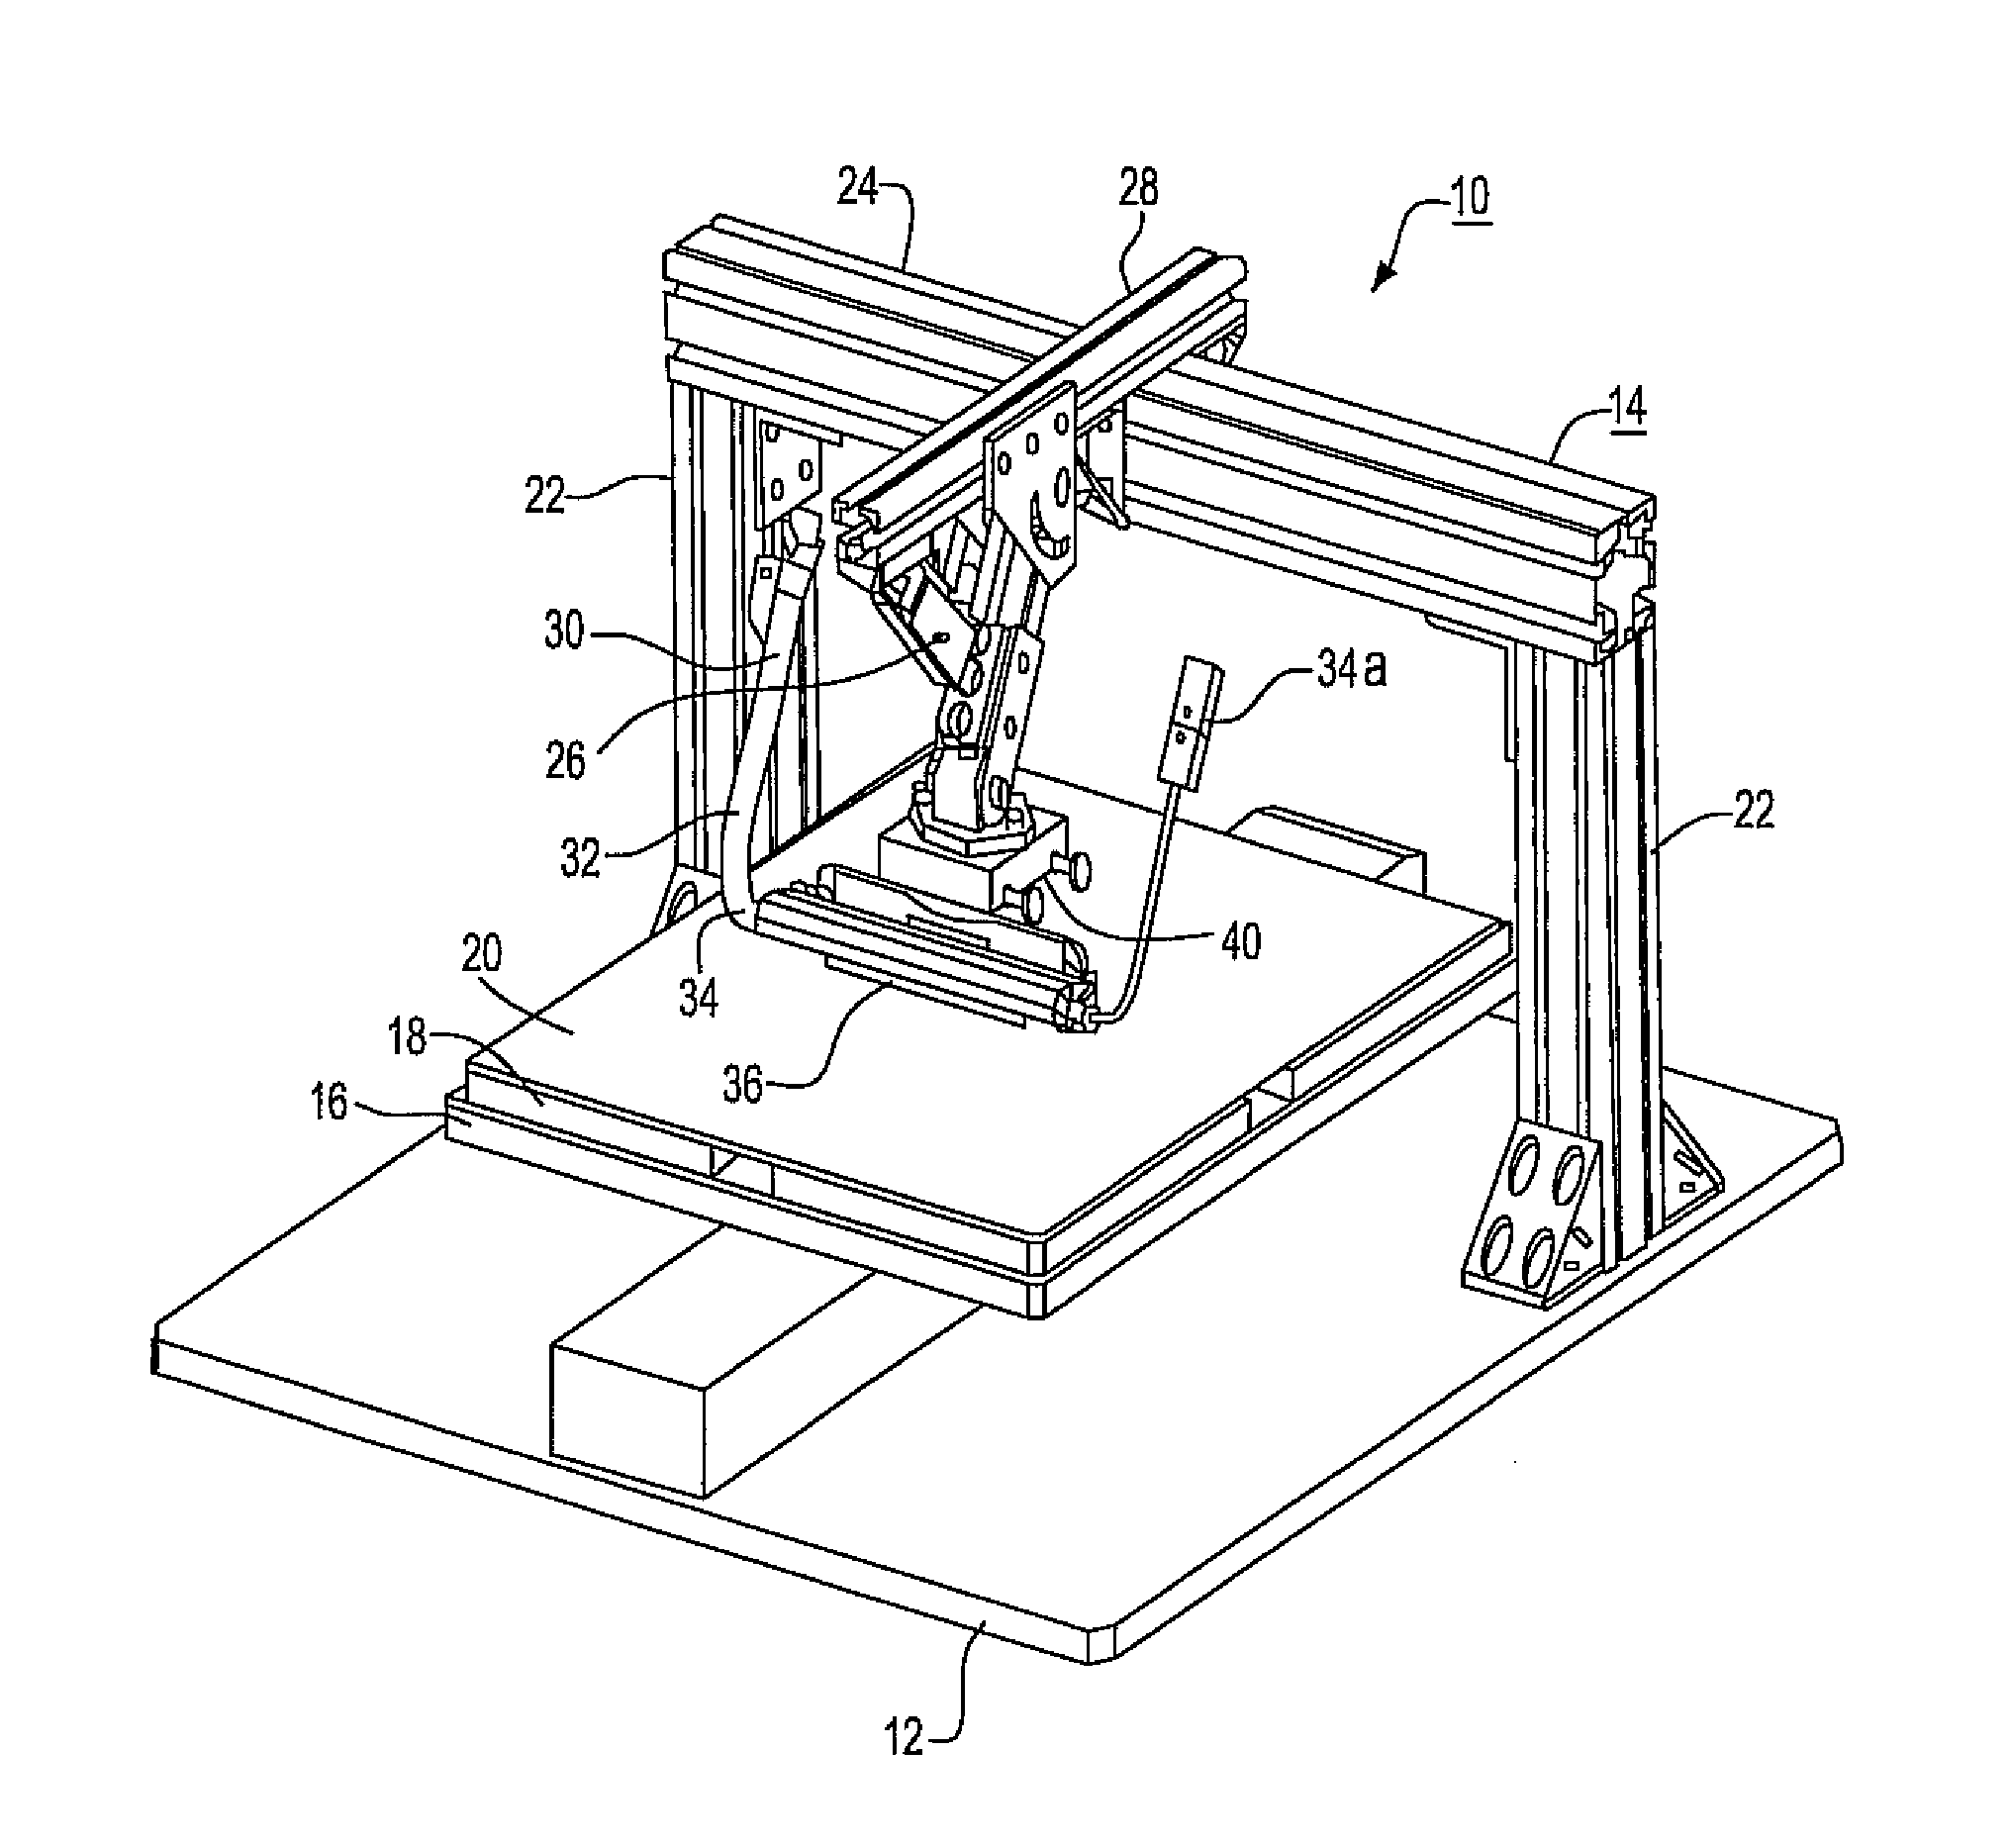 Mold shave apparatus and injection molded soldering process